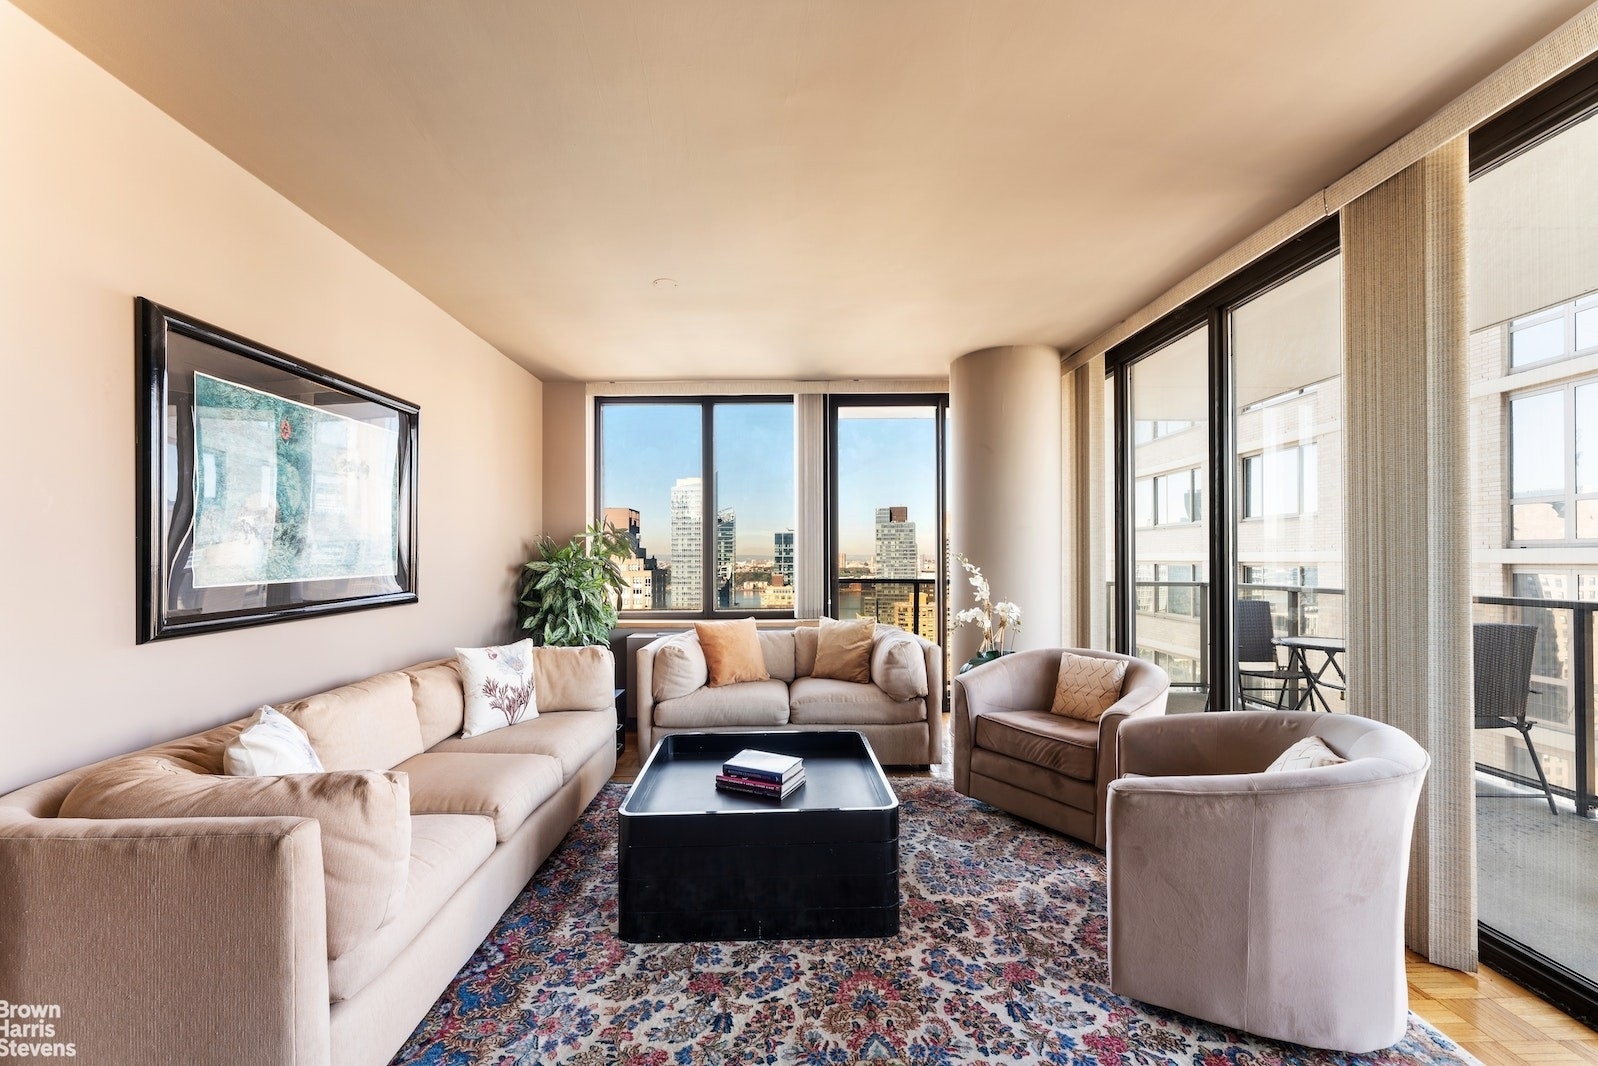 Property at The Alfred, 161 W 61ST ST, 29C Lincoln Square, New York, NY 10023